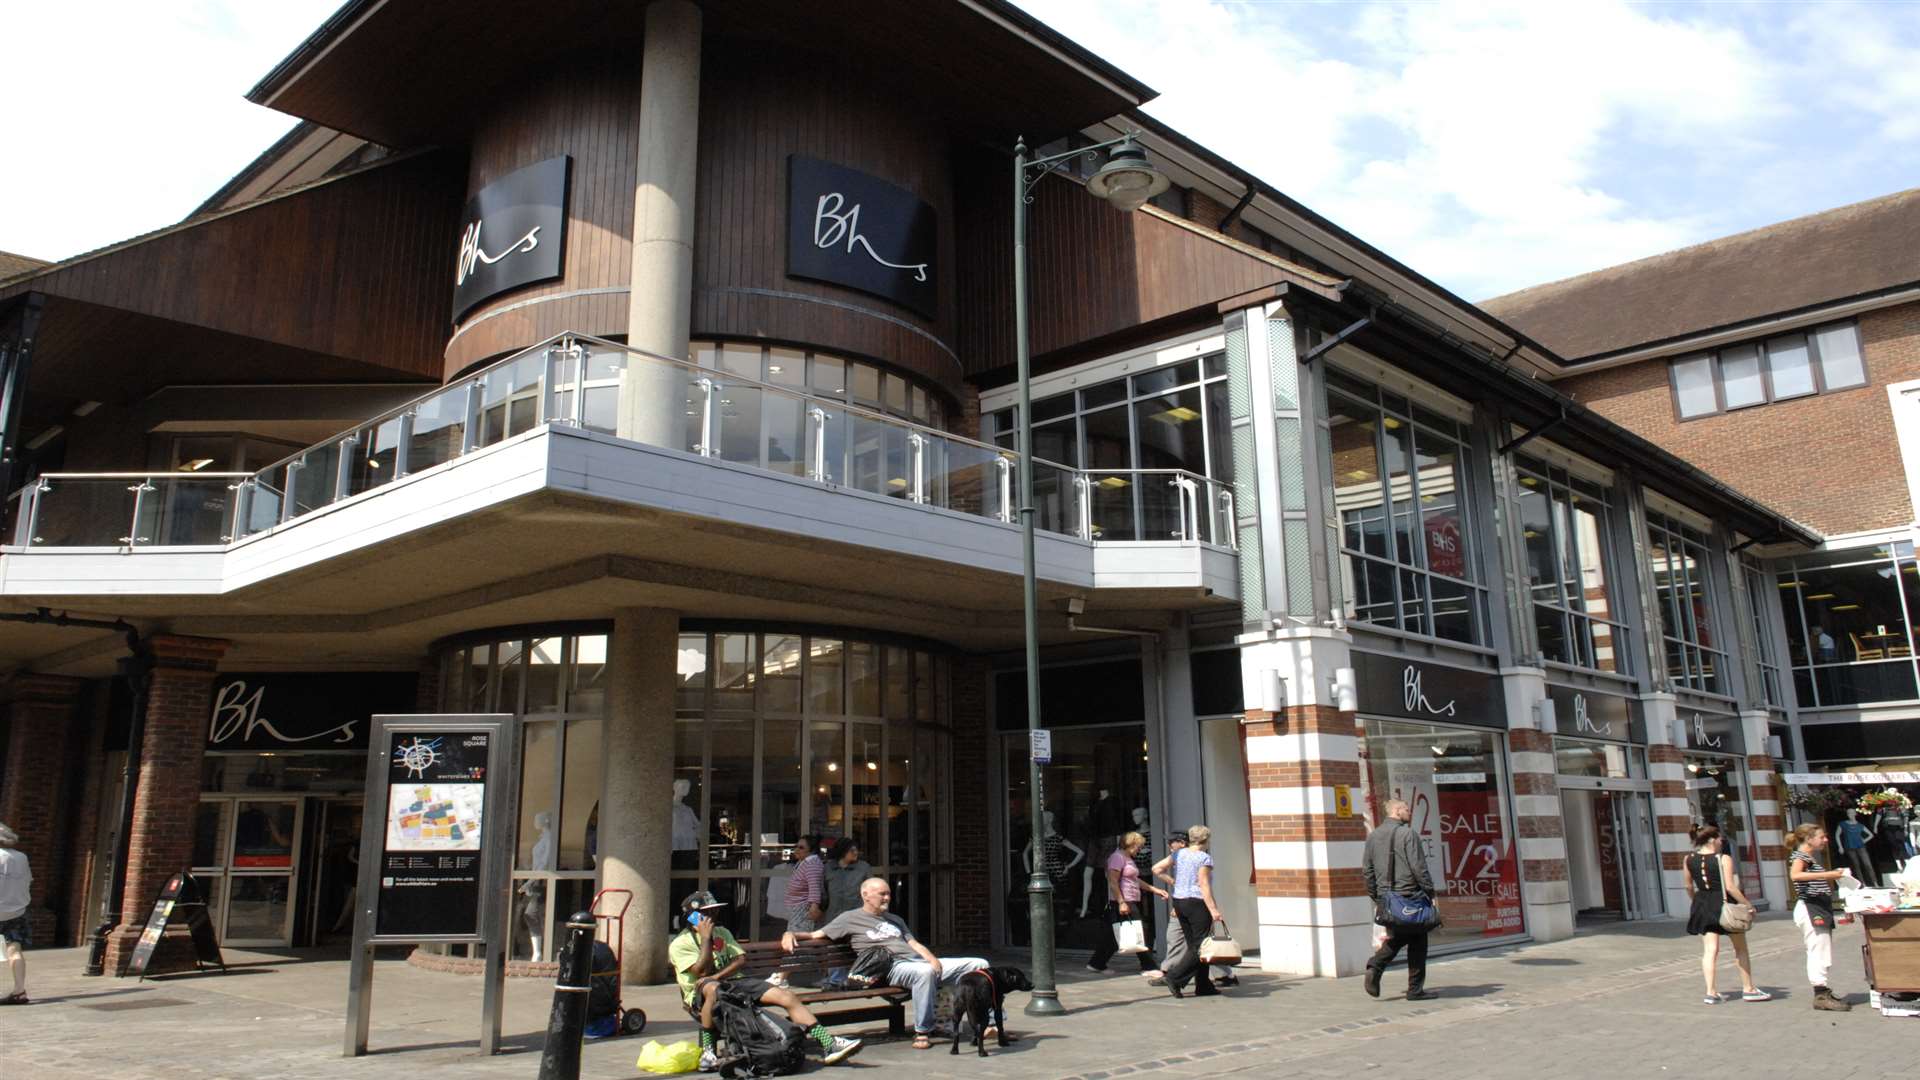 The former Canterbury branch of BHS in Whitefriars shopping centre